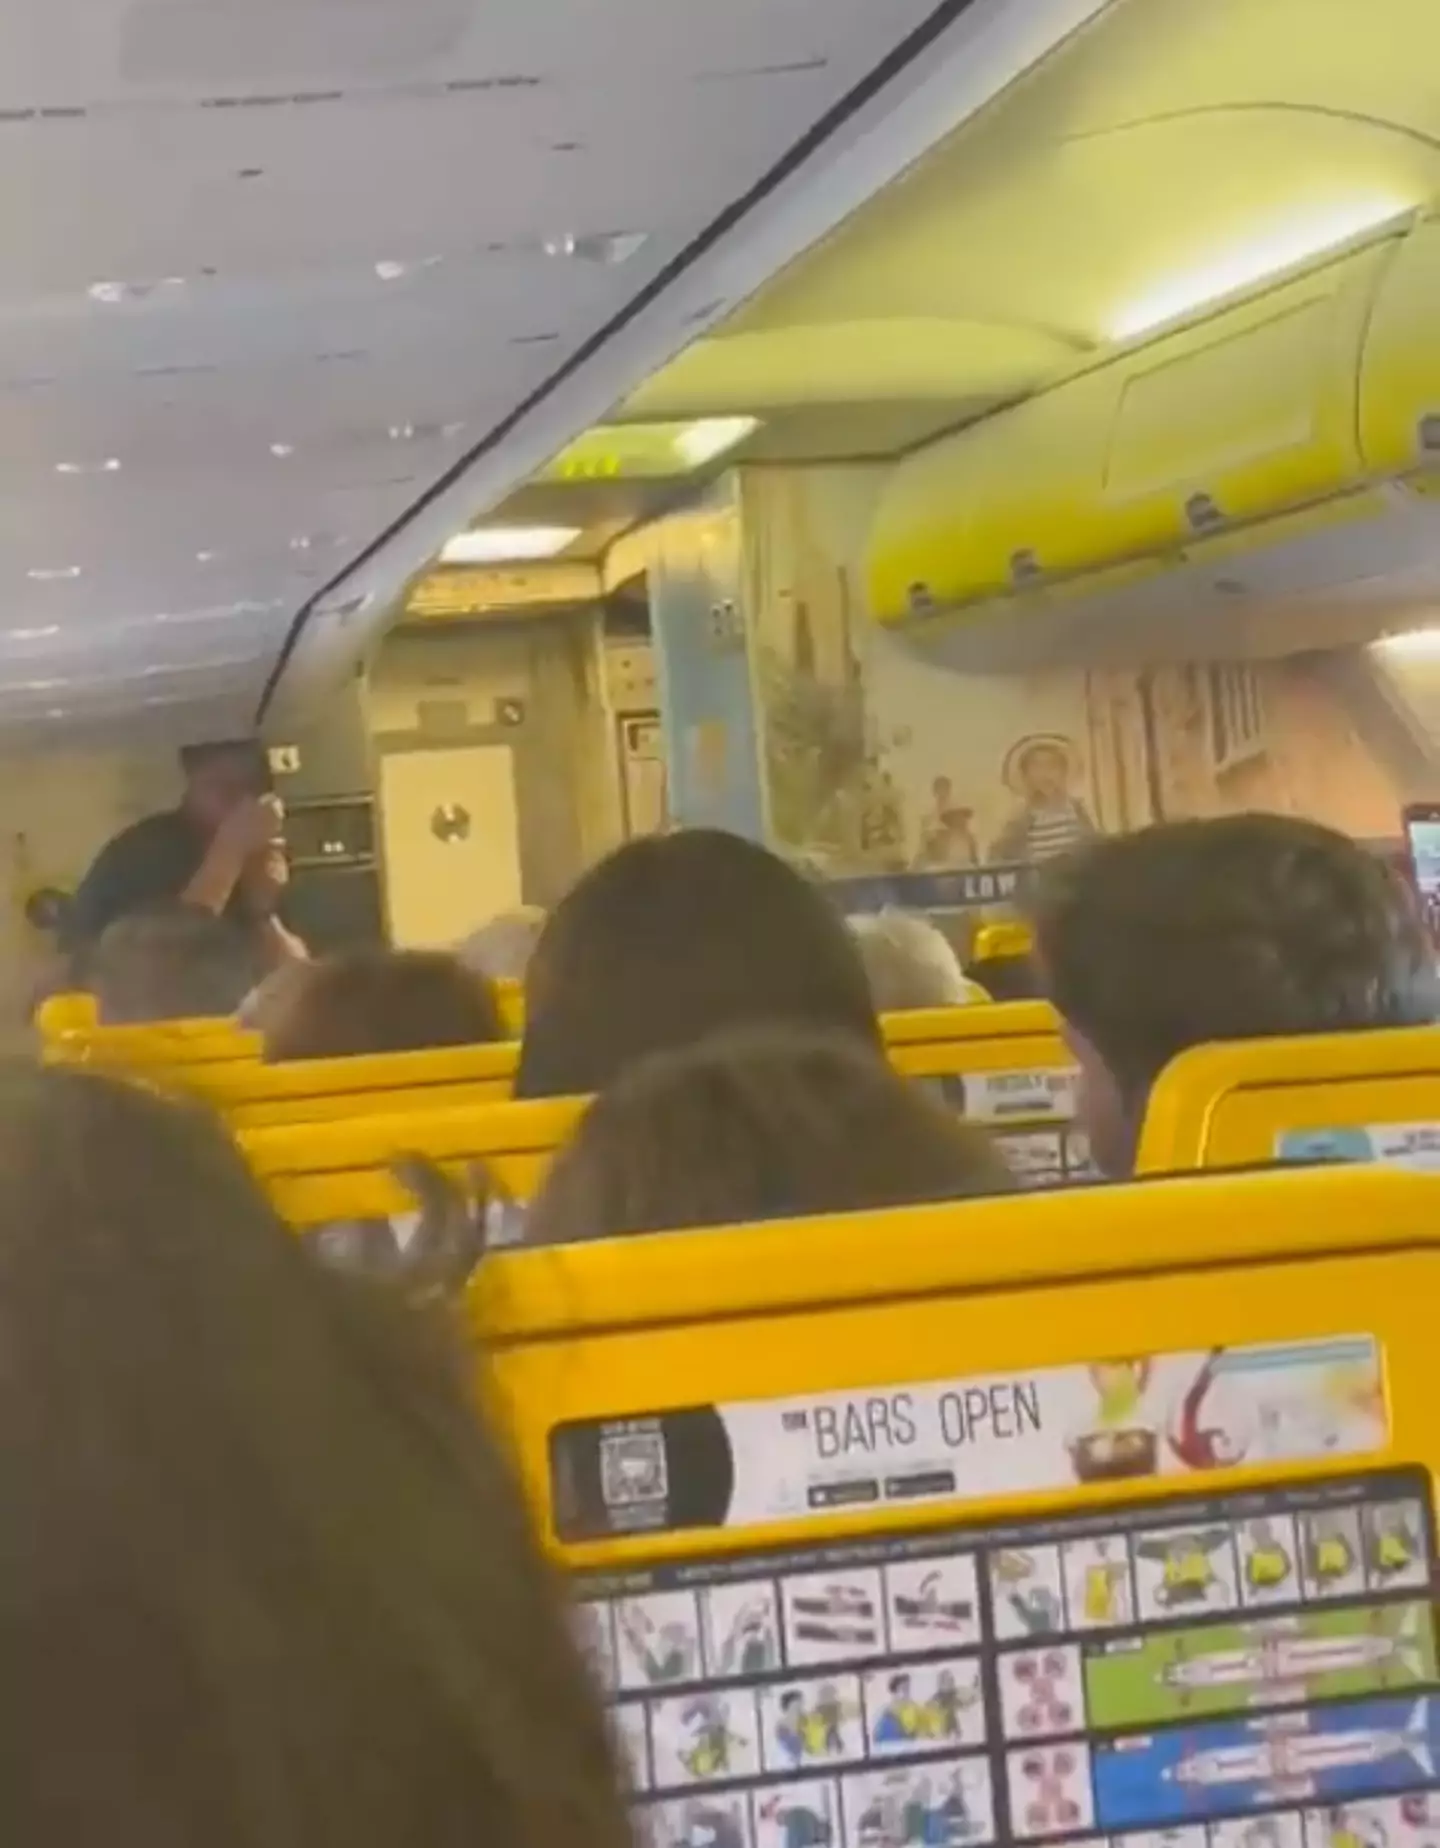 The man burst into song before the Ryanair flight could take off.